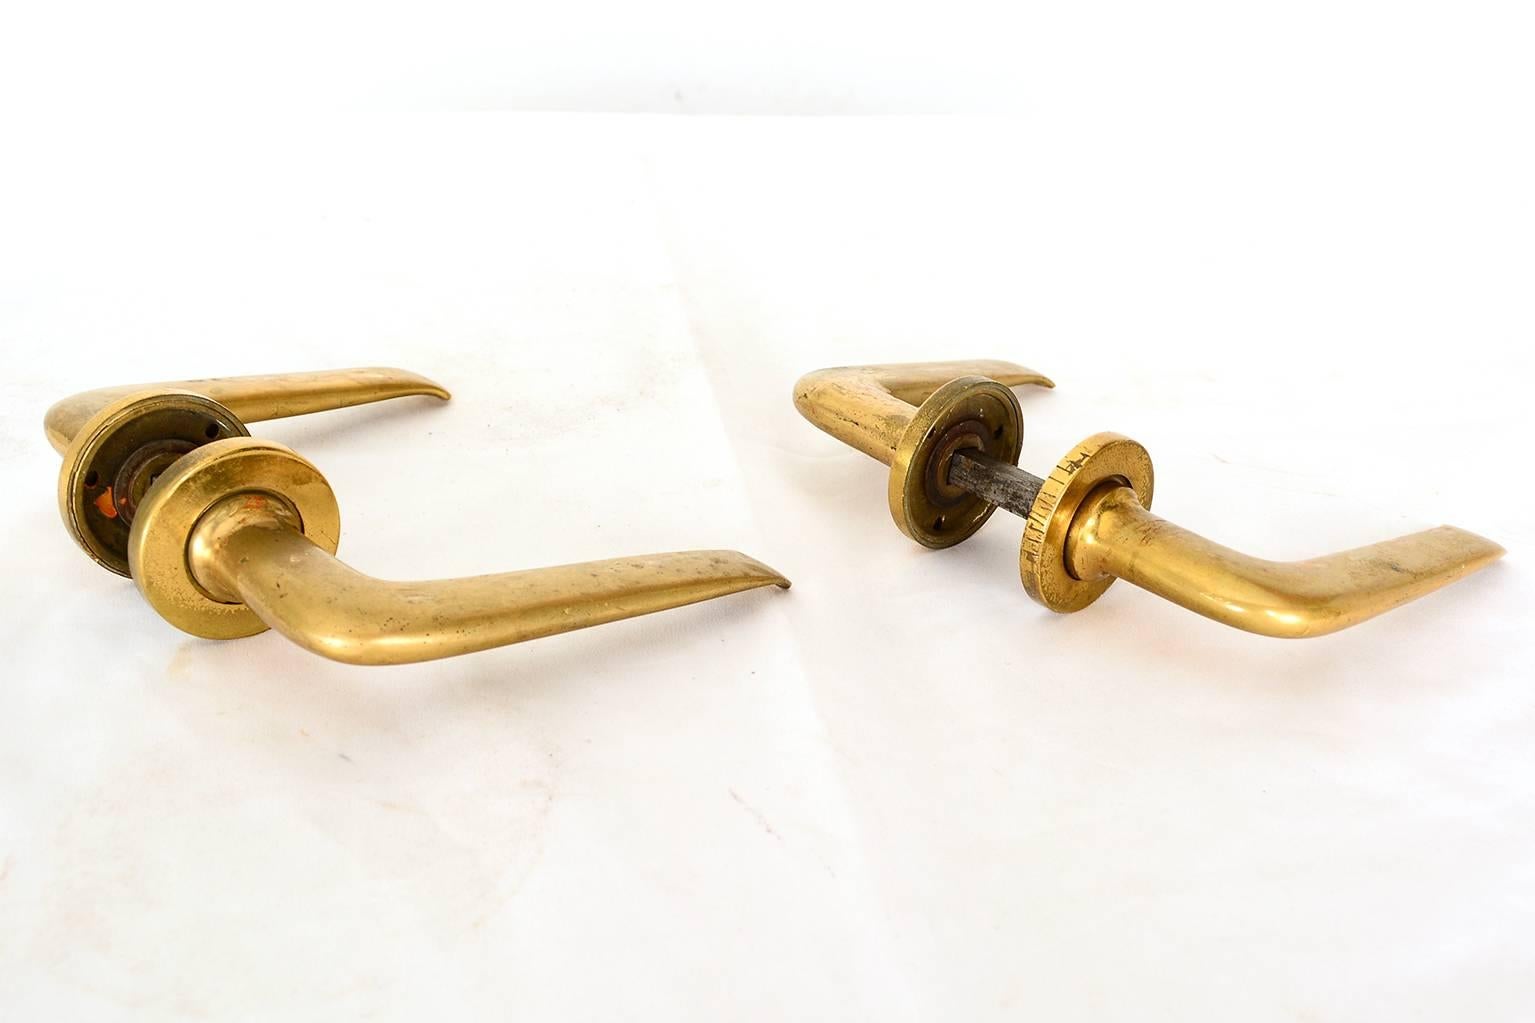 For your consideration a pair of solid brass door handles in sculptural shape.

Beautiful design with clean modern lines.
The clever design secures the handle into the frame of the door with three screws. The screws are concealed with a brass